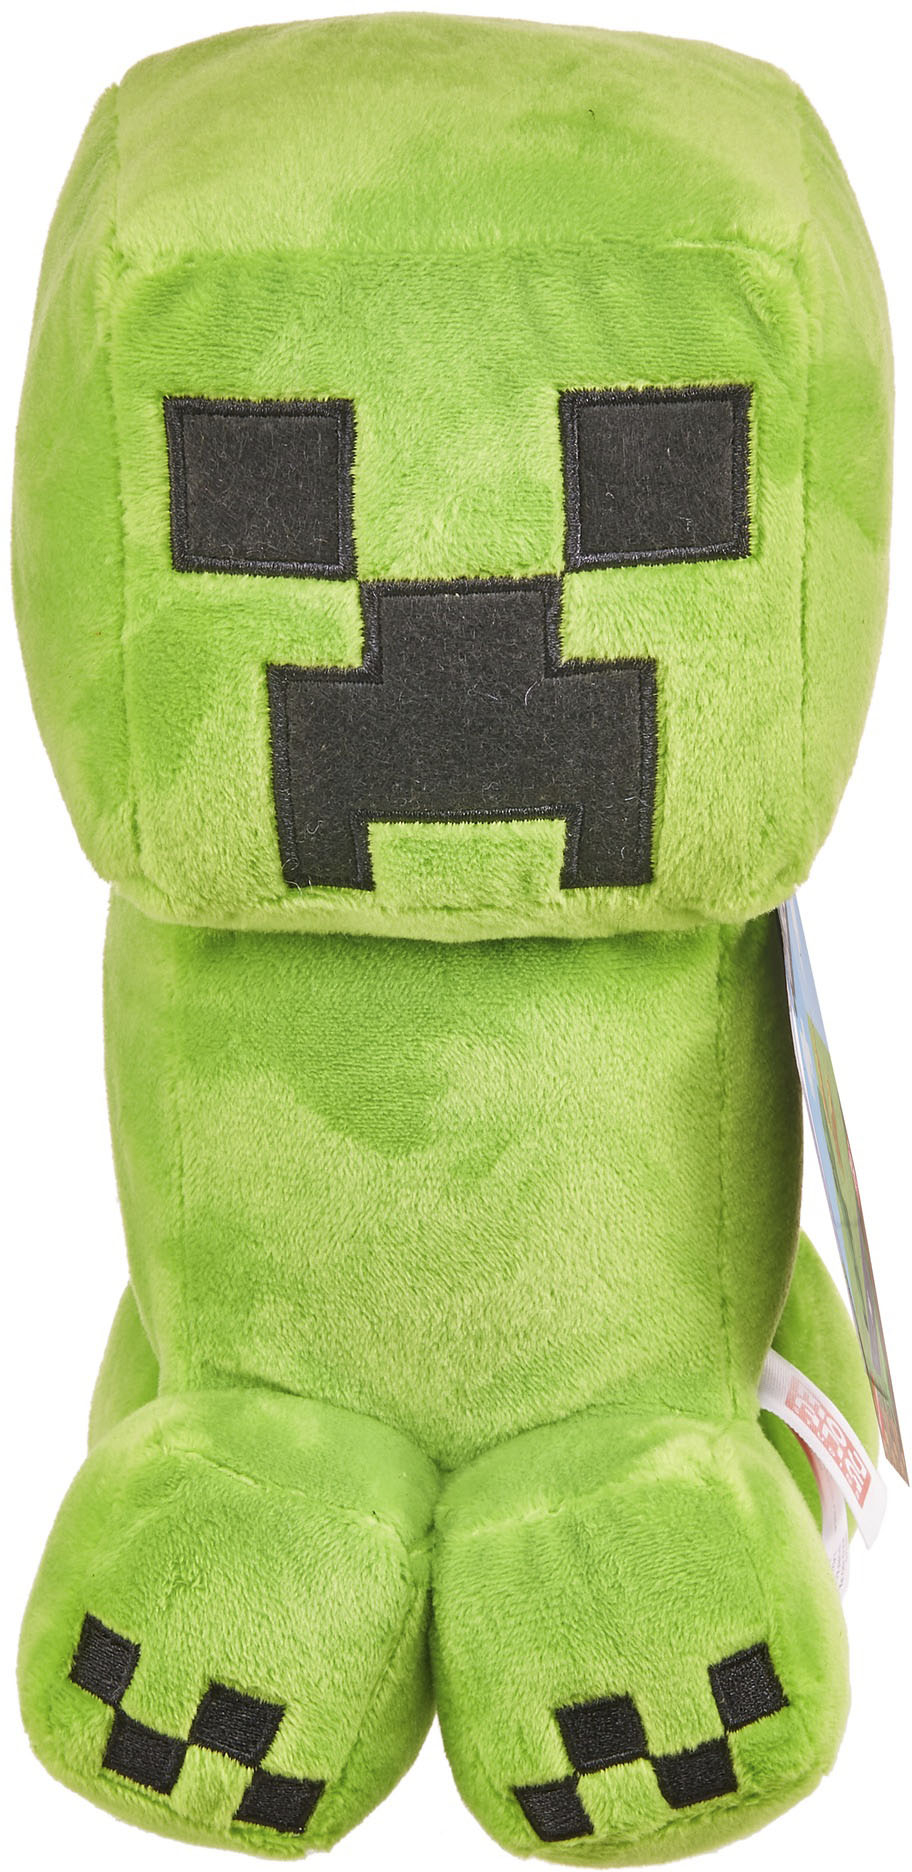 Get Minecraft Merch at Best Buy for the Holidays!